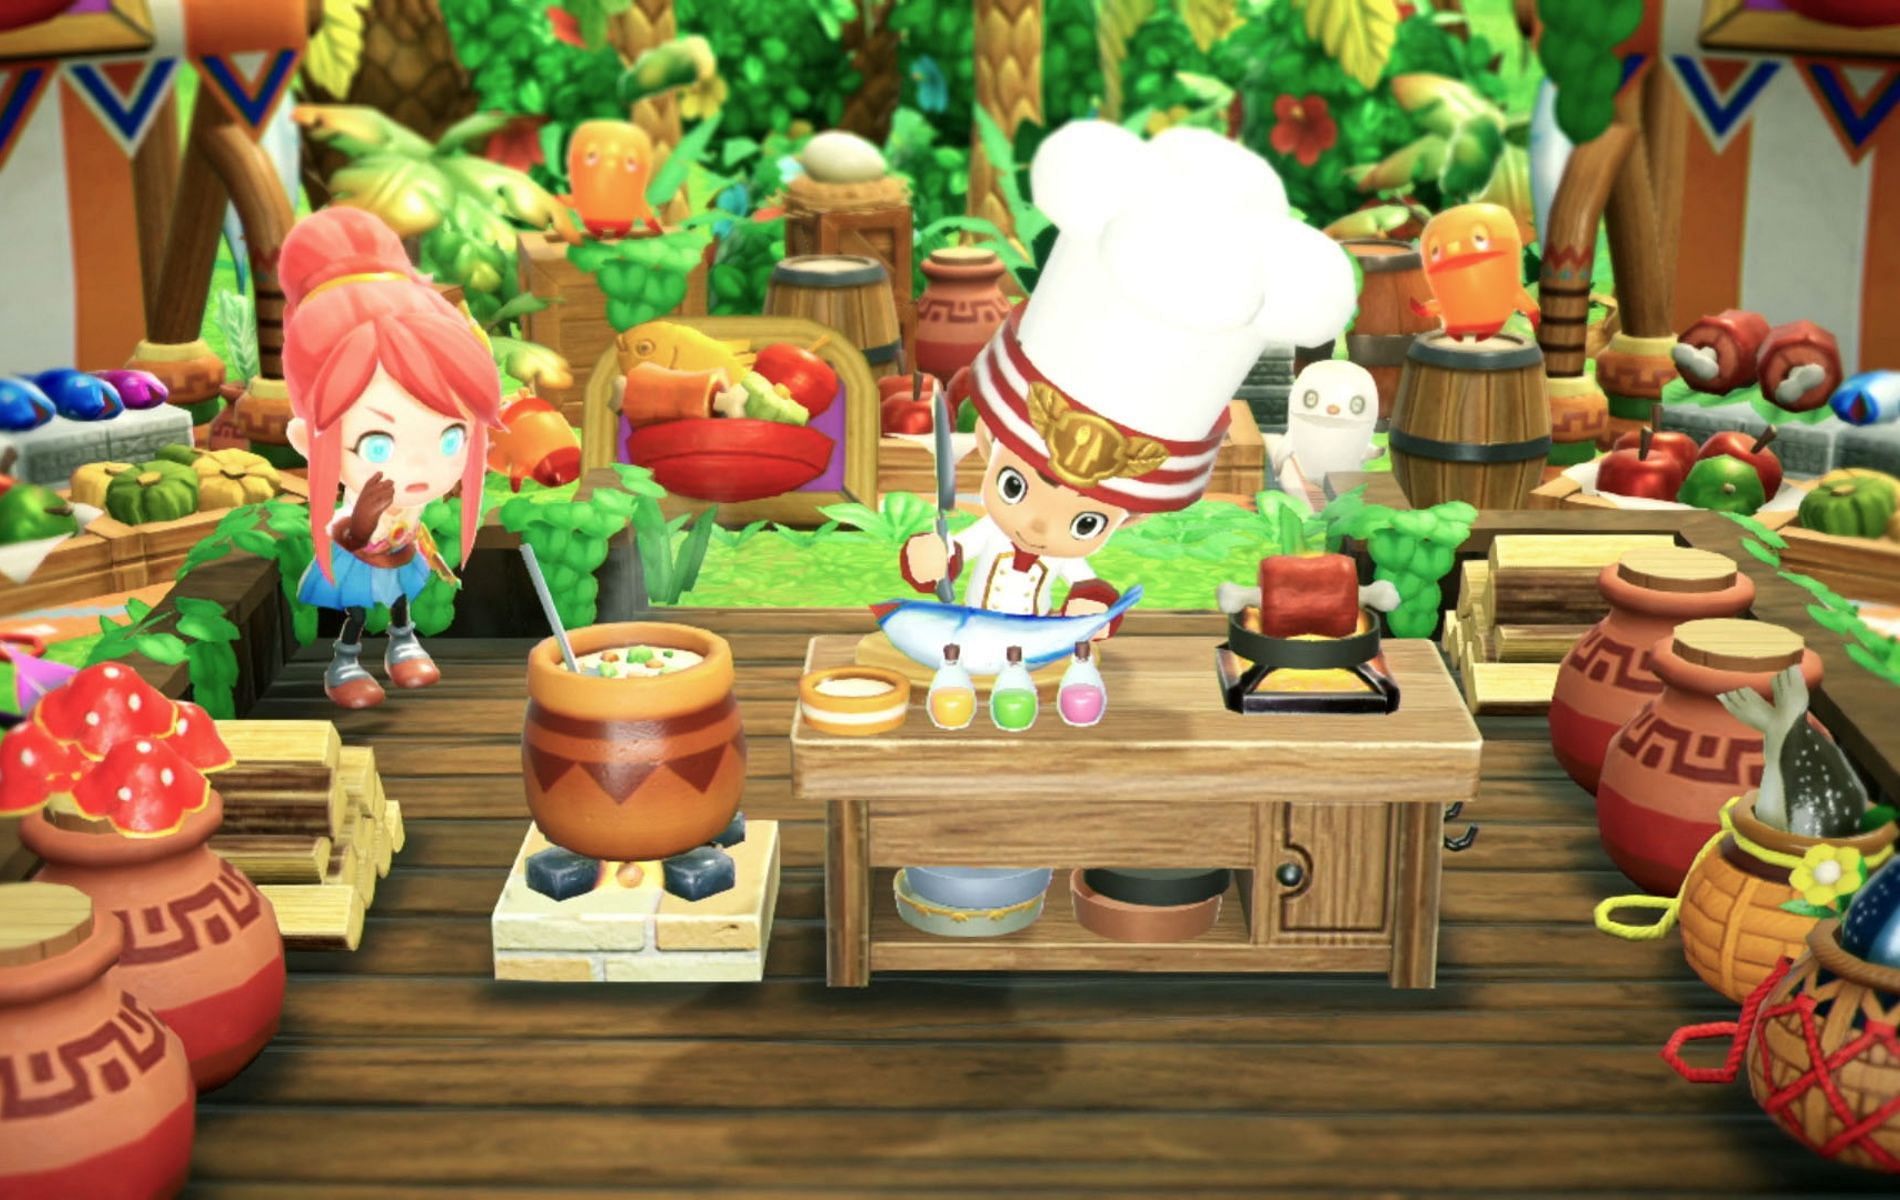 Animal Crossing: New Horizons review: a chill life sim that puts